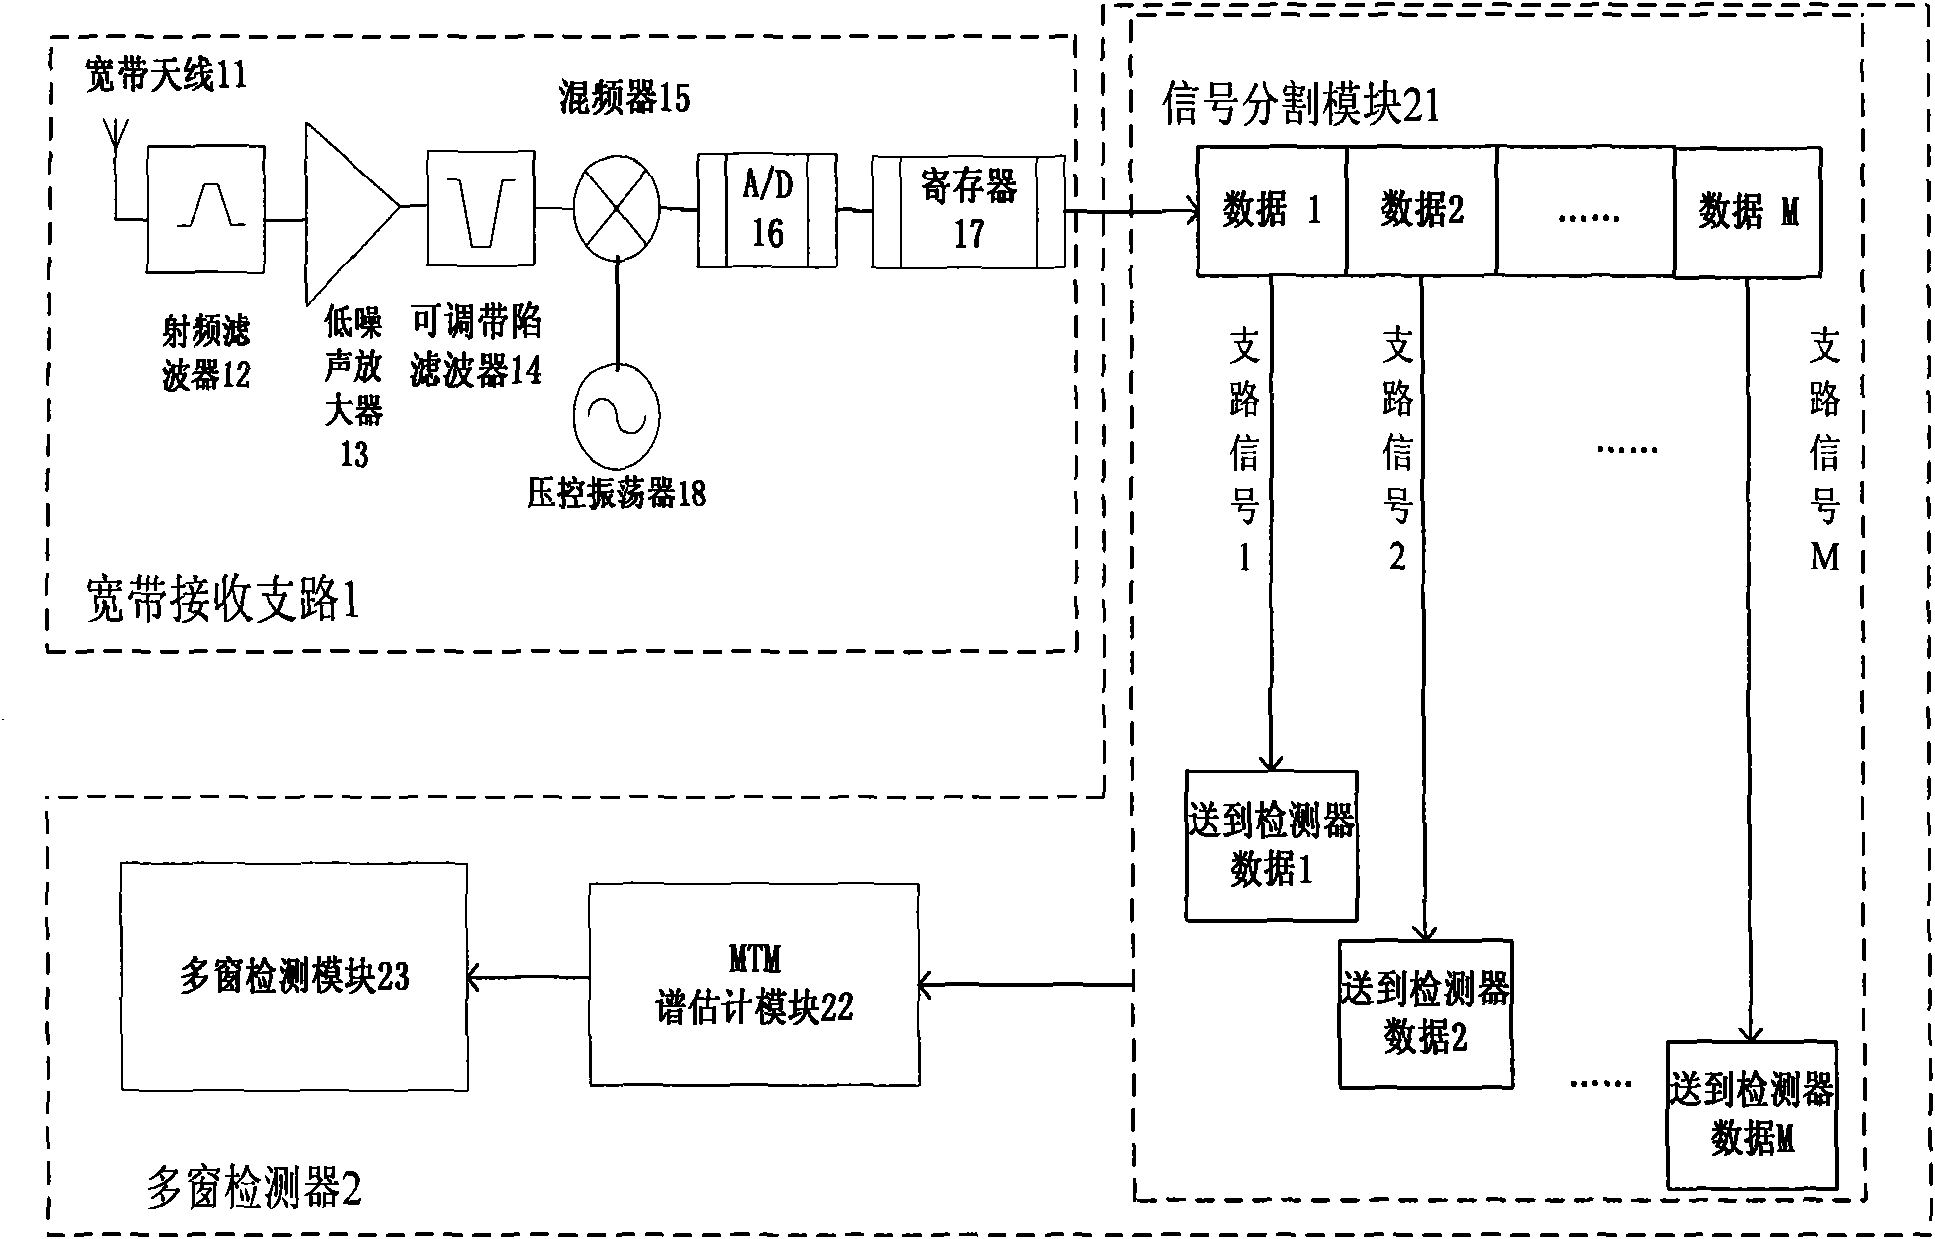 Idle frequency band detector applied to UHF frequency band